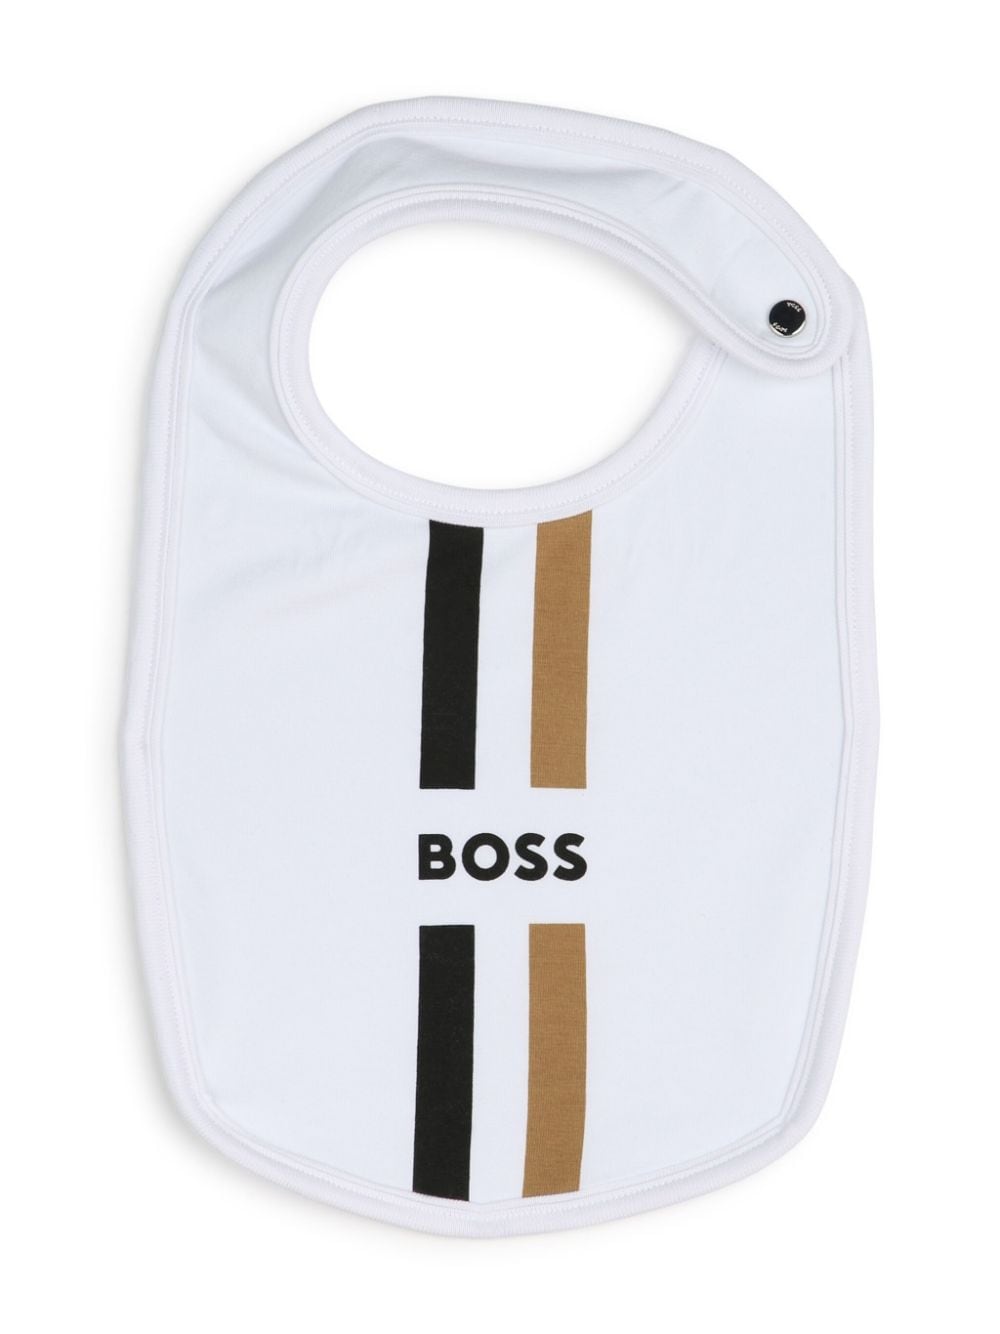 Multicolored baby bibs with logo